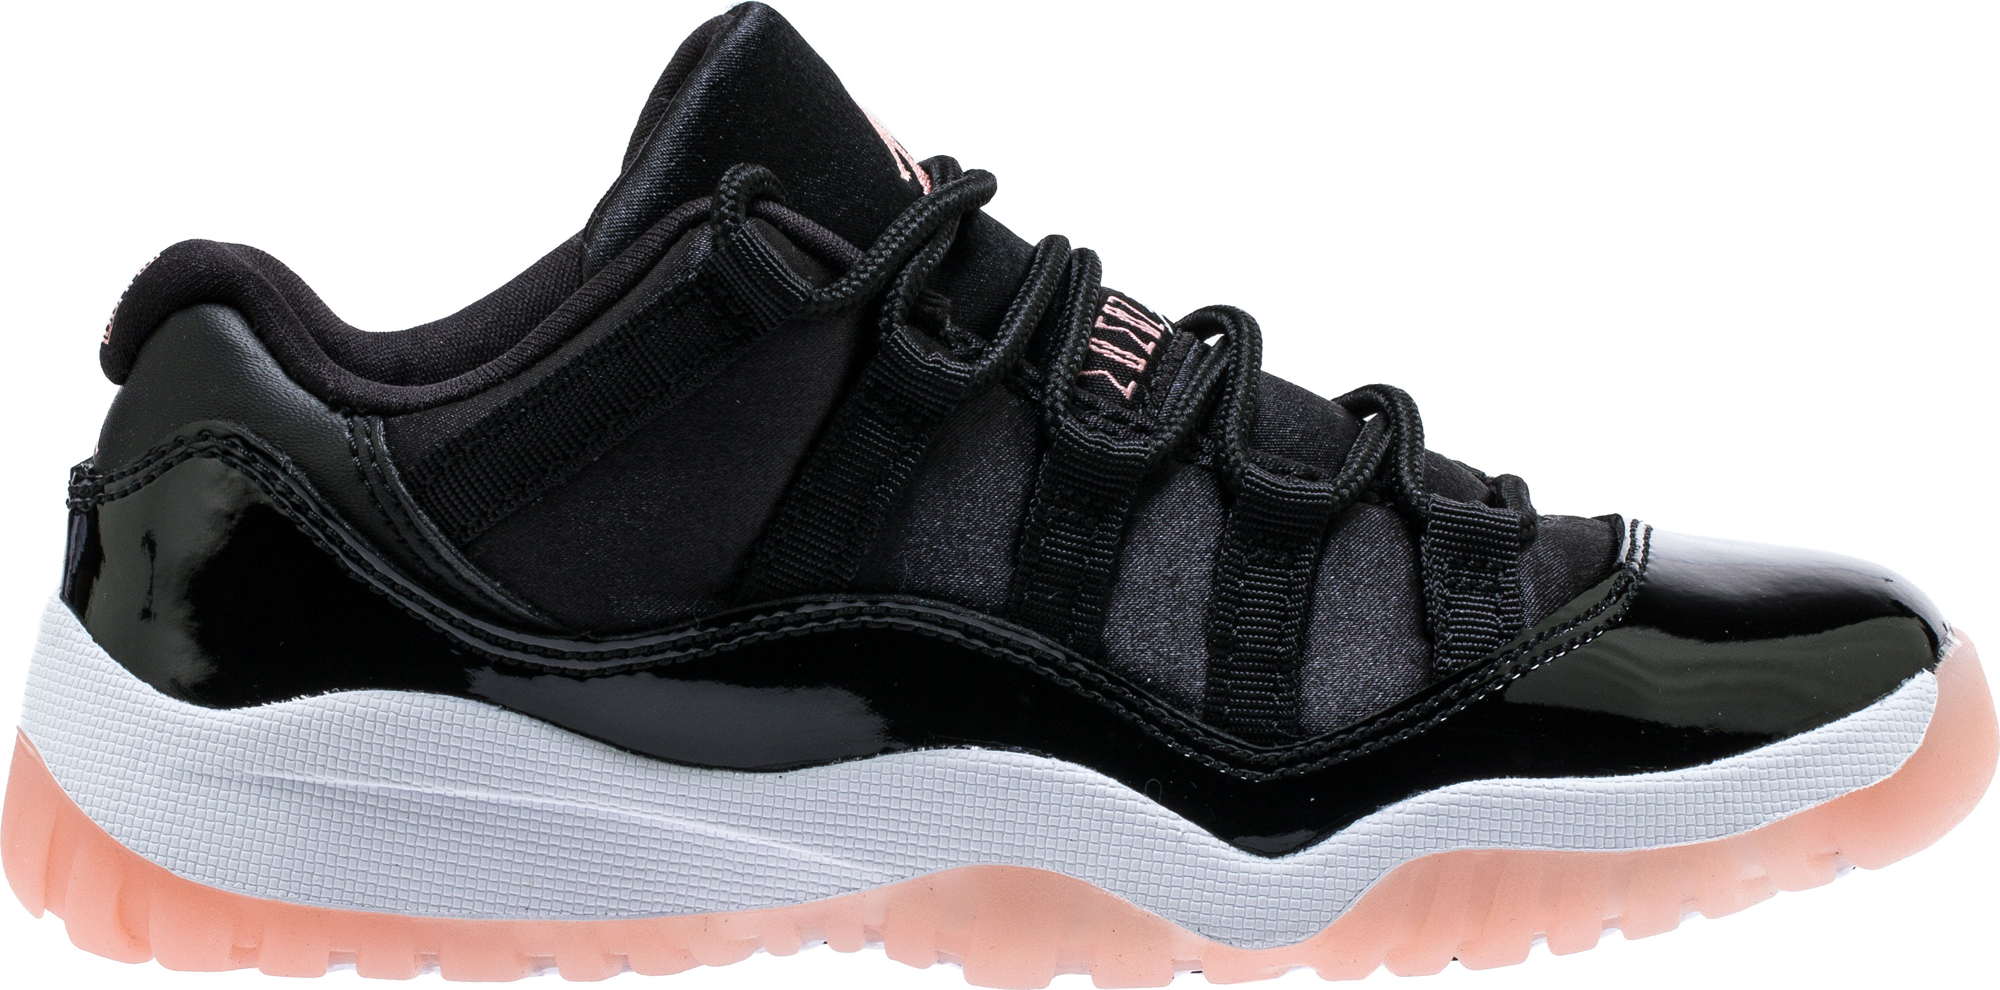 retro 11 bleached coral